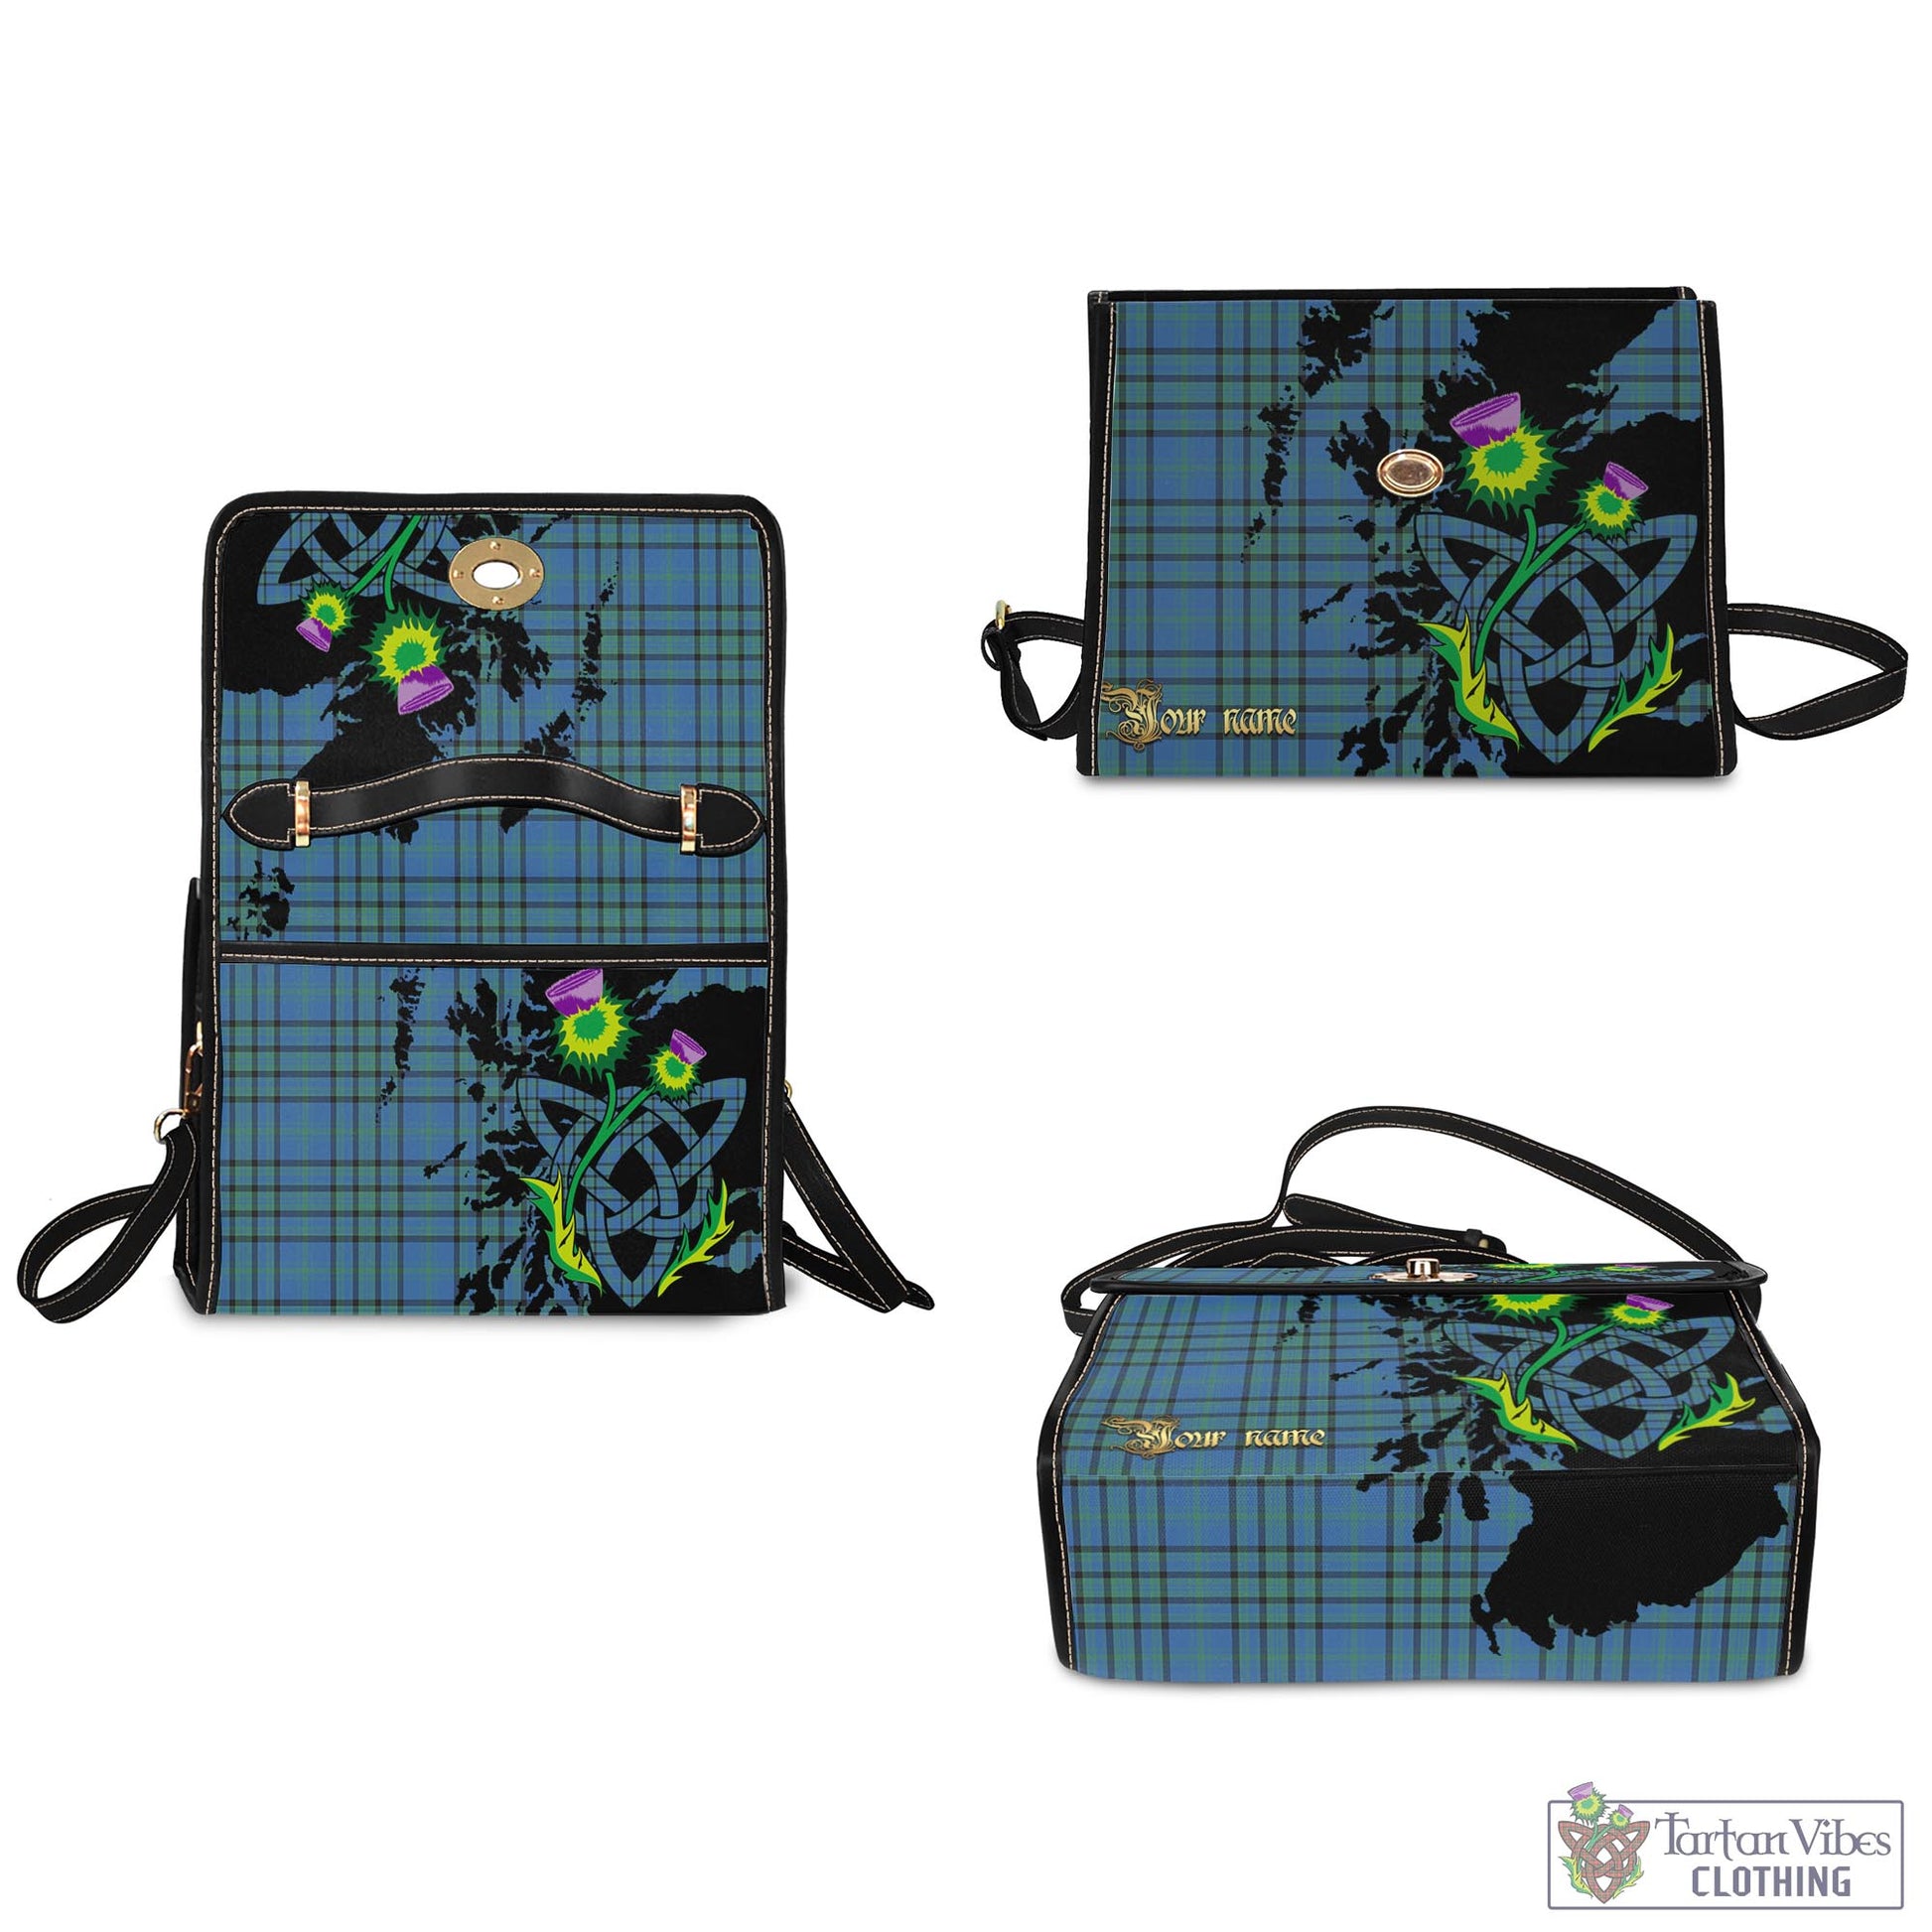 Tartan Vibes Clothing Matheson Hunting Ancient Tartan Waterproof Canvas Bag with Scotland Map and Thistle Celtic Accents